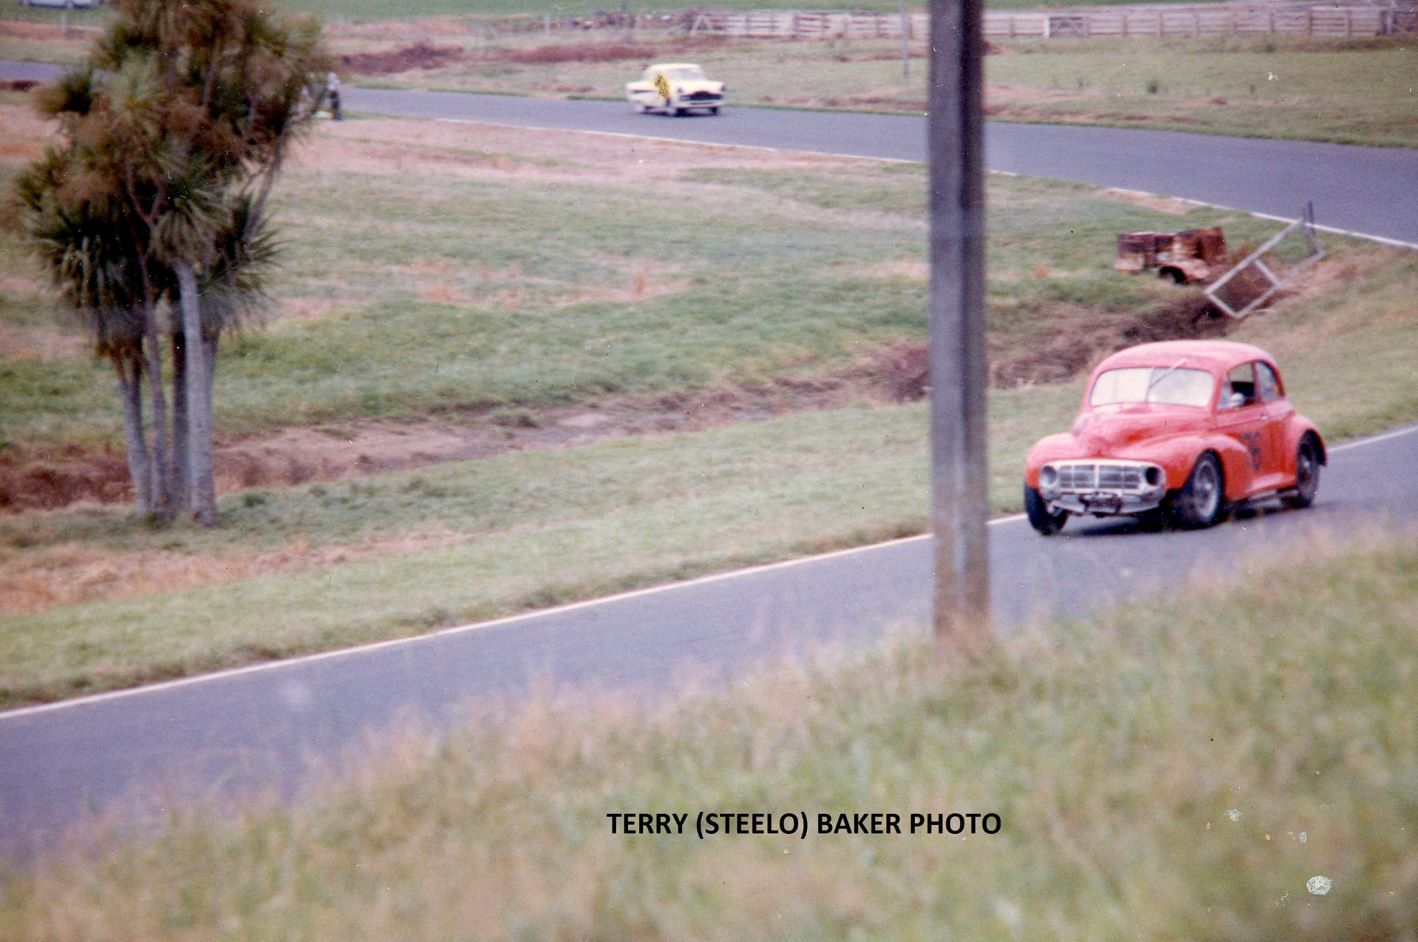 Name:  Pukekohe 1965 #039 Morrari coming over Rothmans 1965 NZGP 180kb arch J L Lawton photo Terry Stee.jpg
Views: 48
Size:  180.0 KB